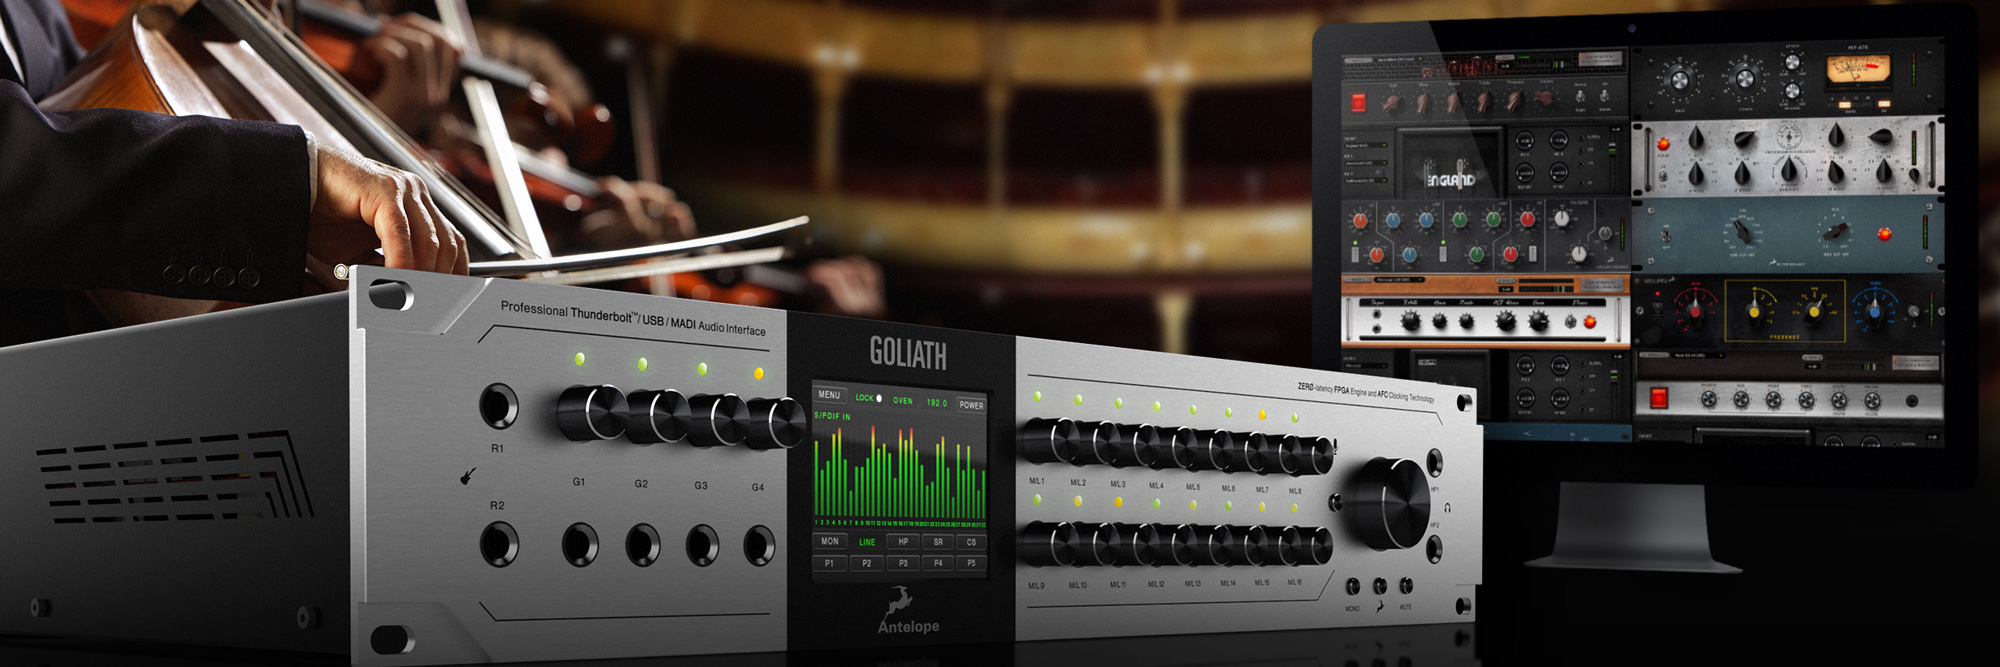 Vintage mic modeling with Goliath's new Launcher